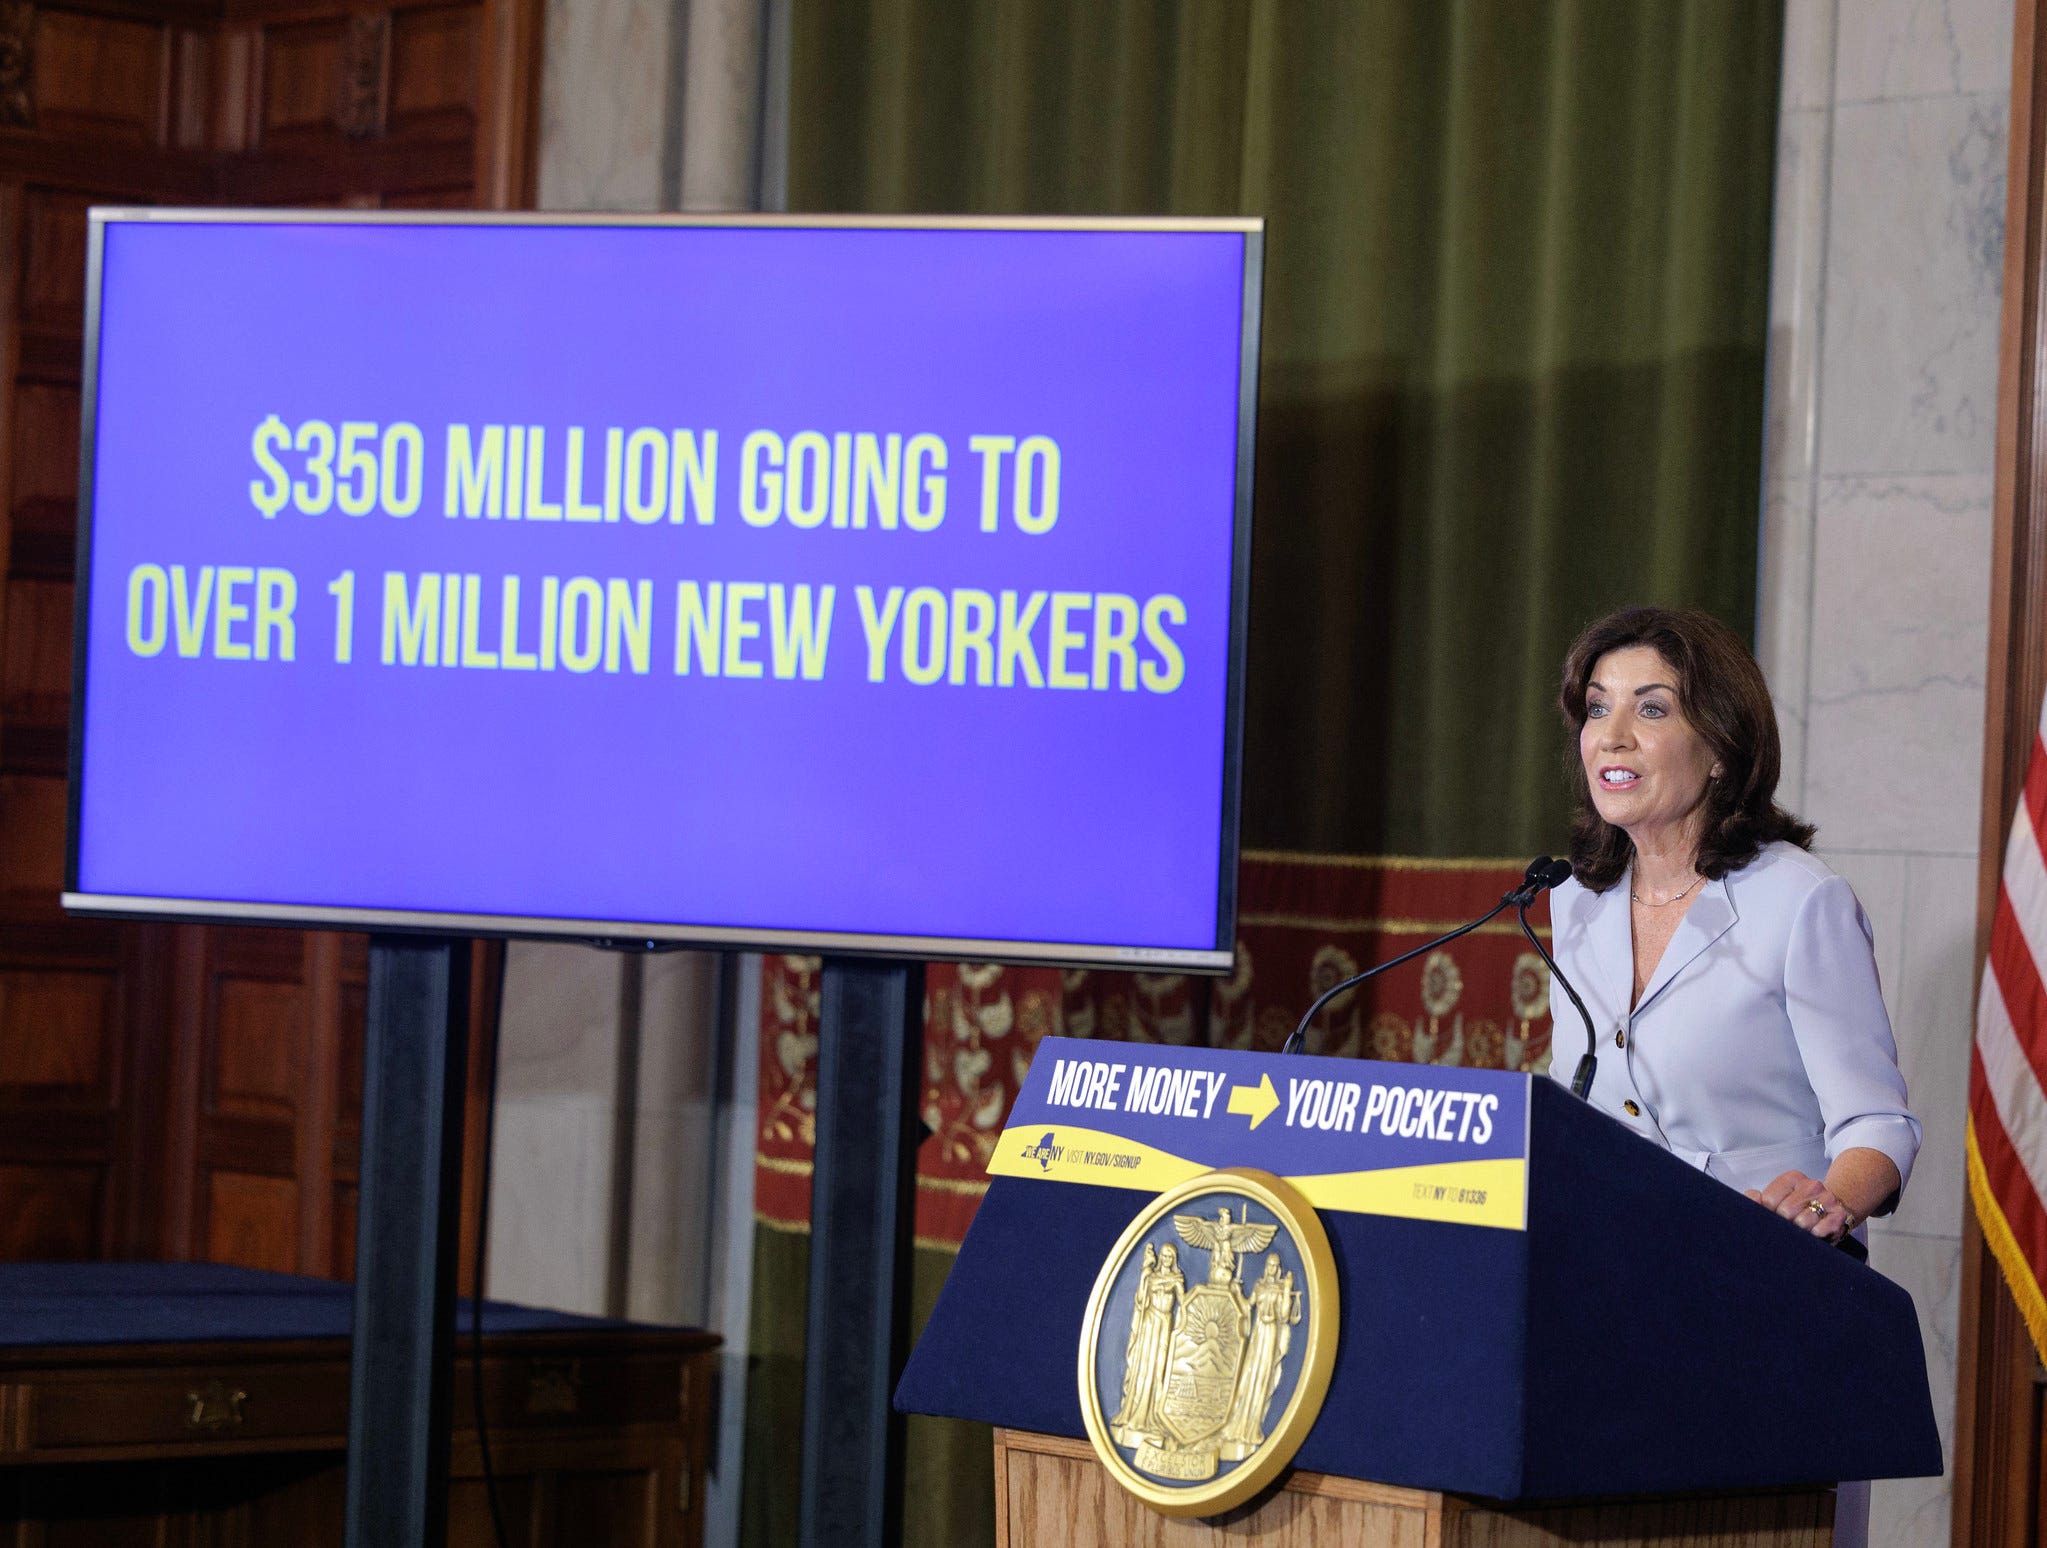 Child tax credit payments: NY to send 1M families bonus checks. How it'll work